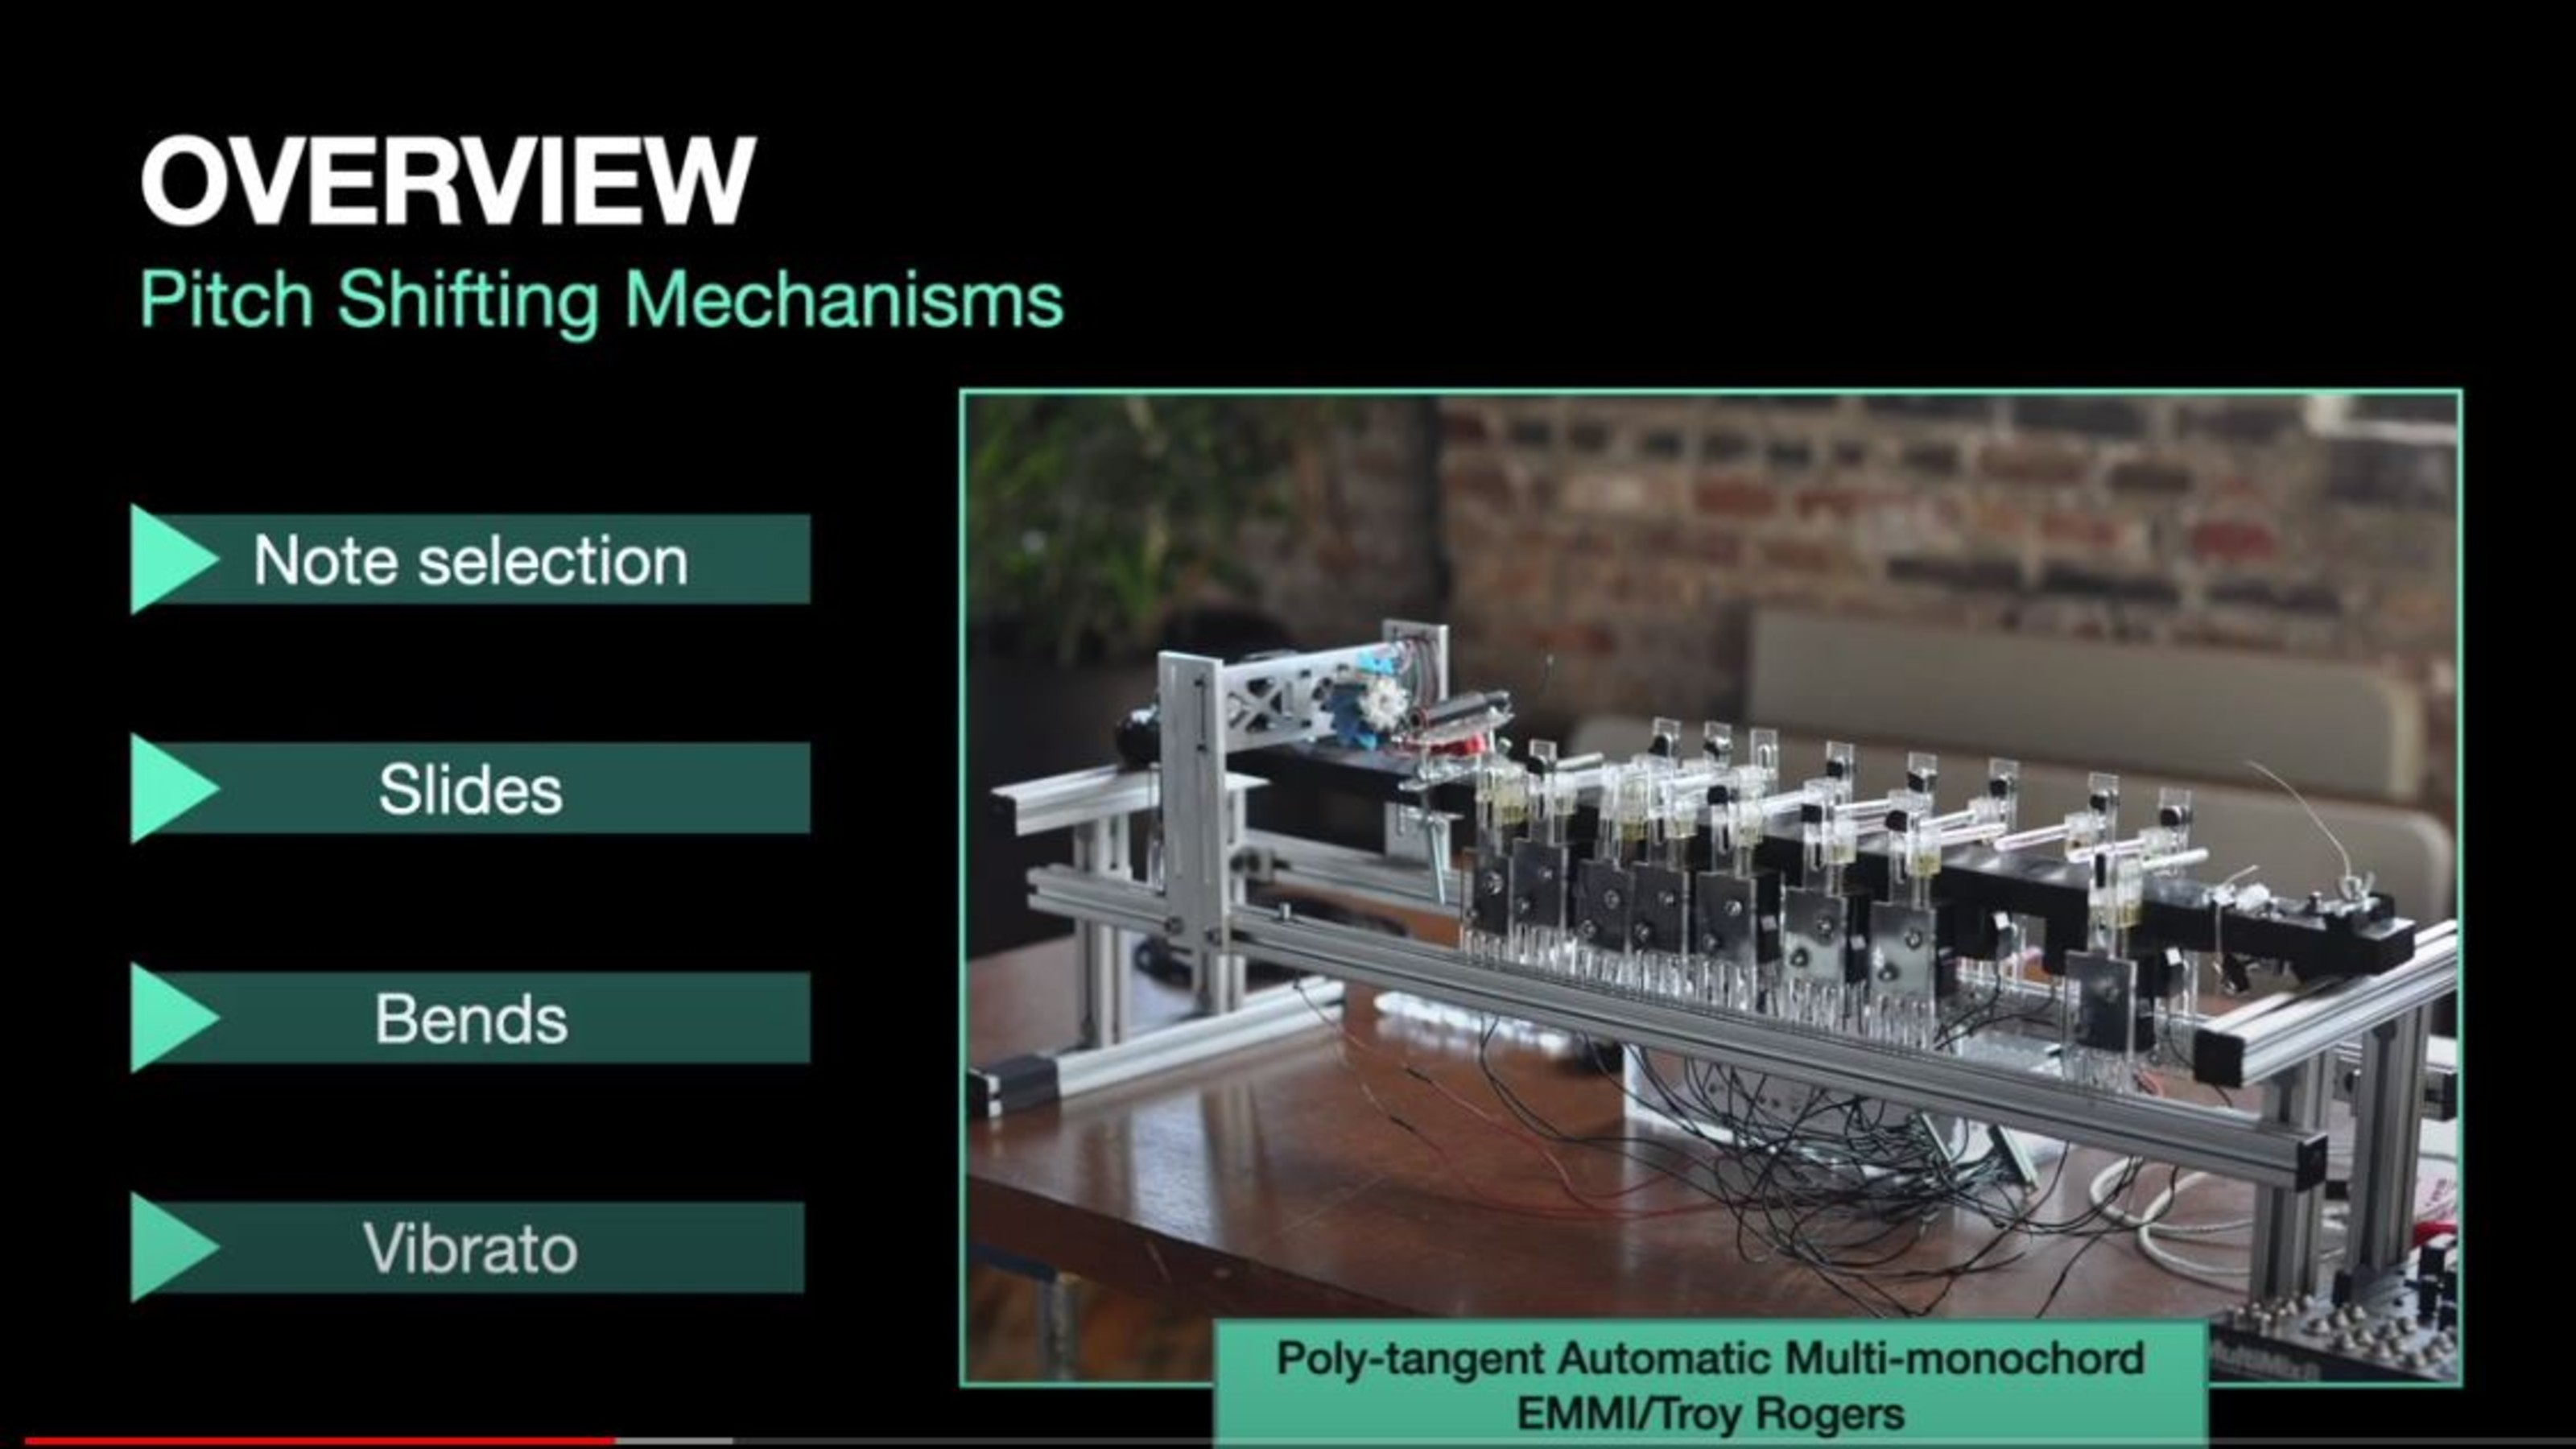 A still from 'Expressive Pitch Shifting Mechanism for Mechatronic Chordophones' by PhD student Juan Pablo Yepez Placencia and supervisors Jim Murphy and Dale Carnegie. 